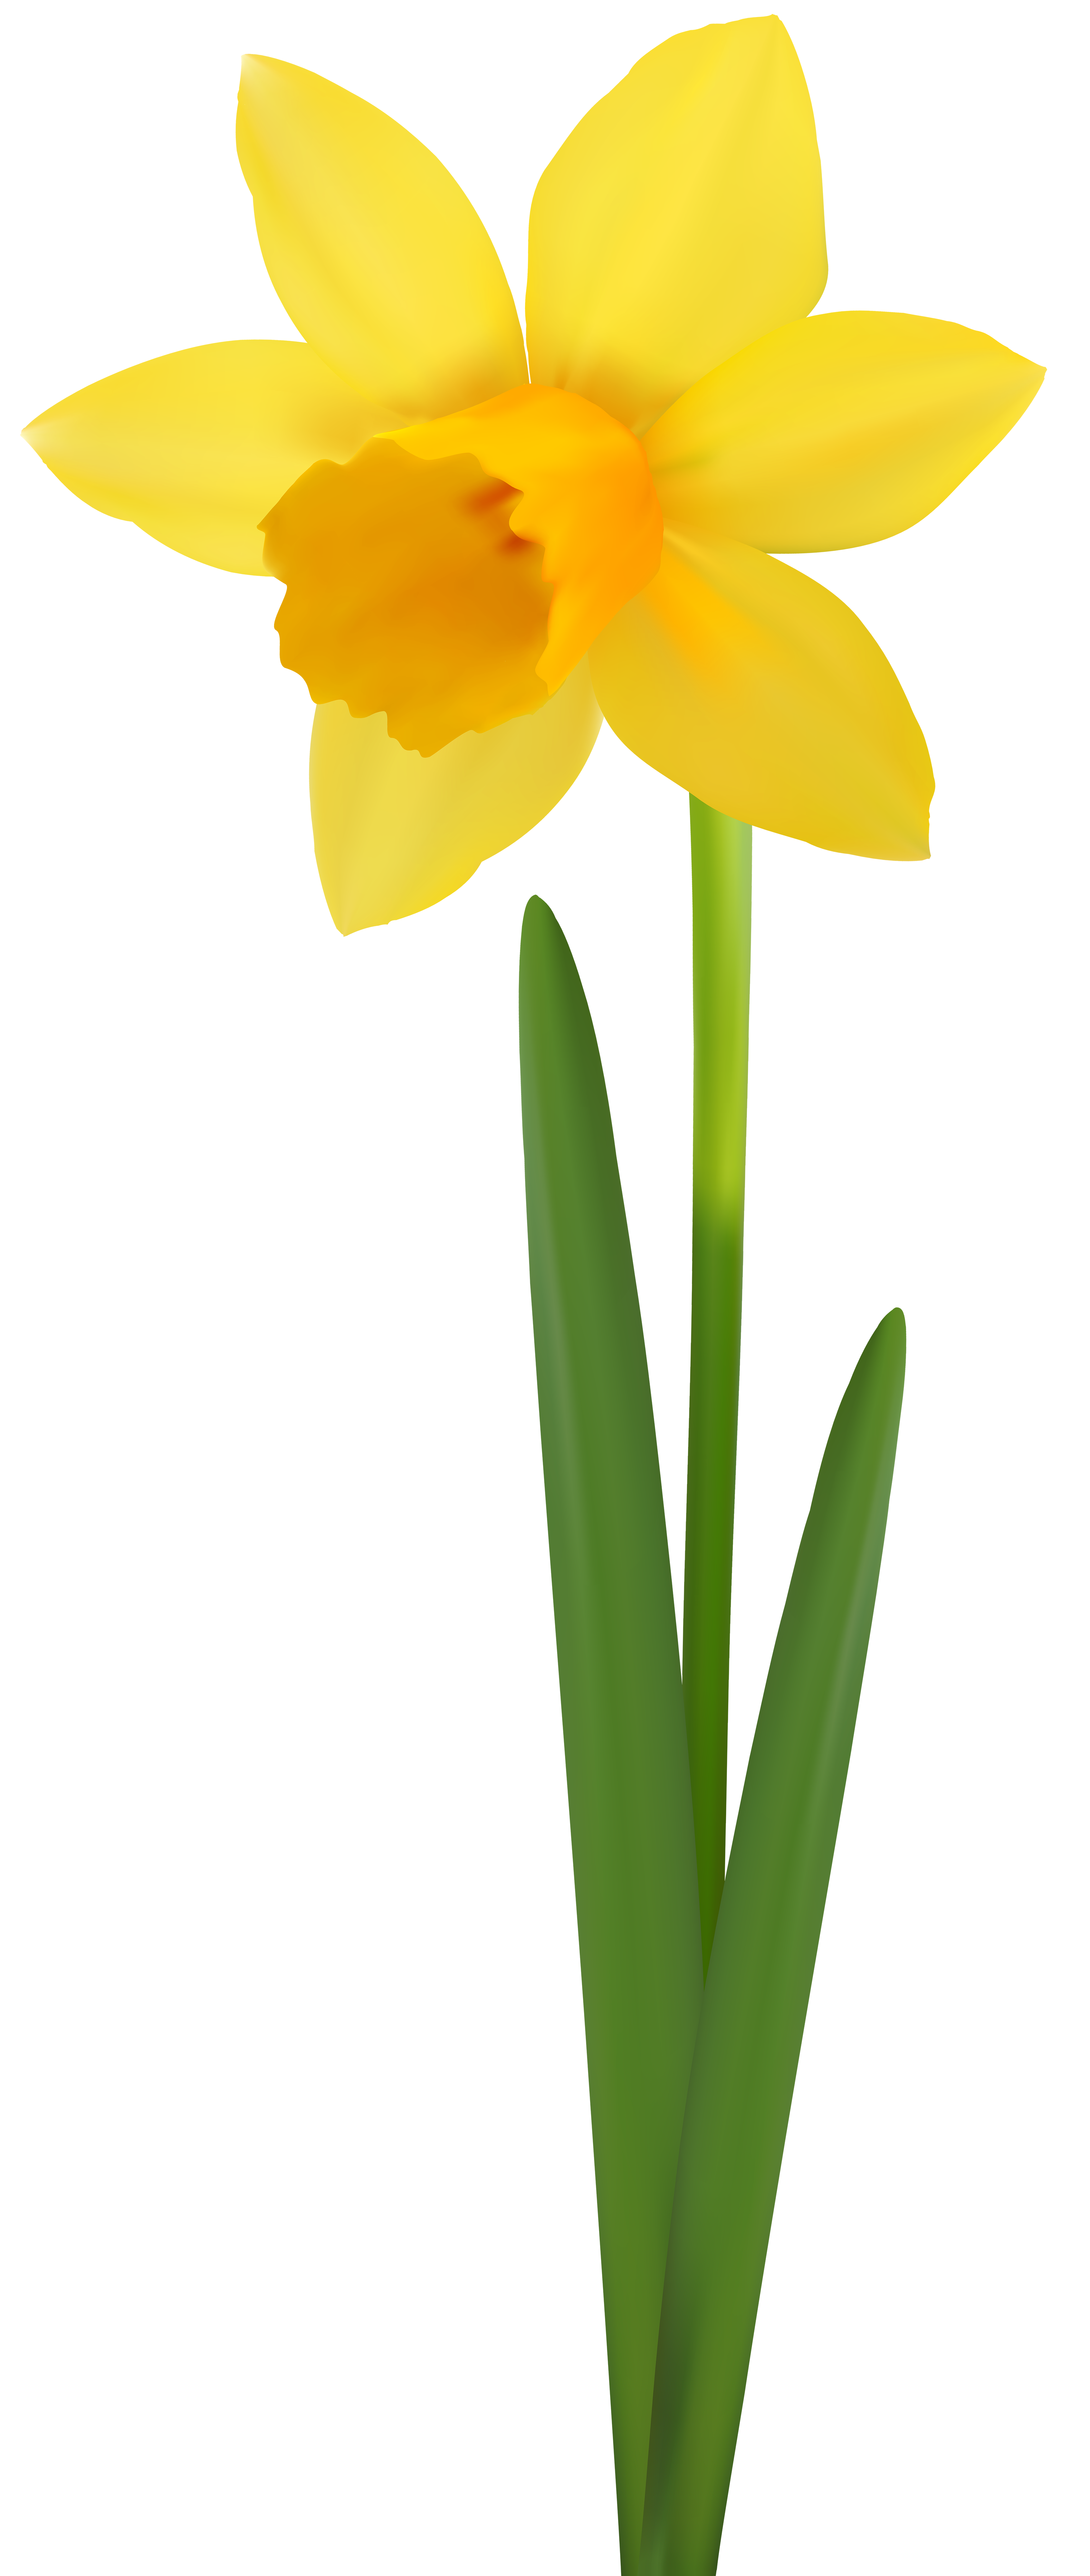 Daffodil Flower Transparent Image | Gallery Yopriceville - High-Quality ...